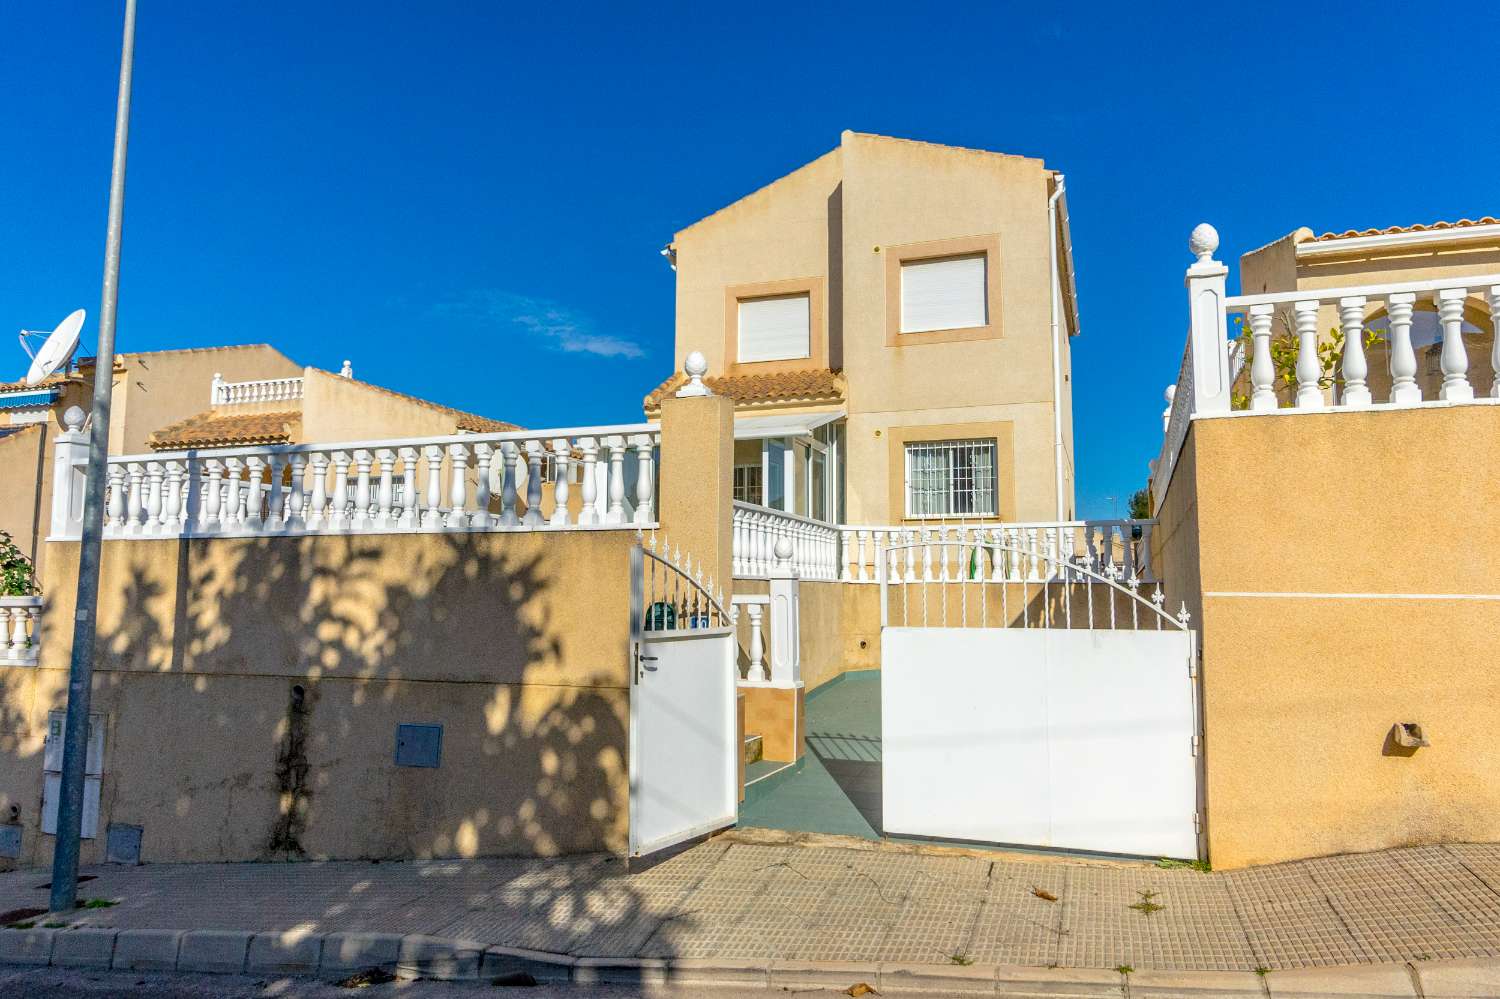 Detached villa with 4 bedrooms, 2 bathrooms and communal pool.